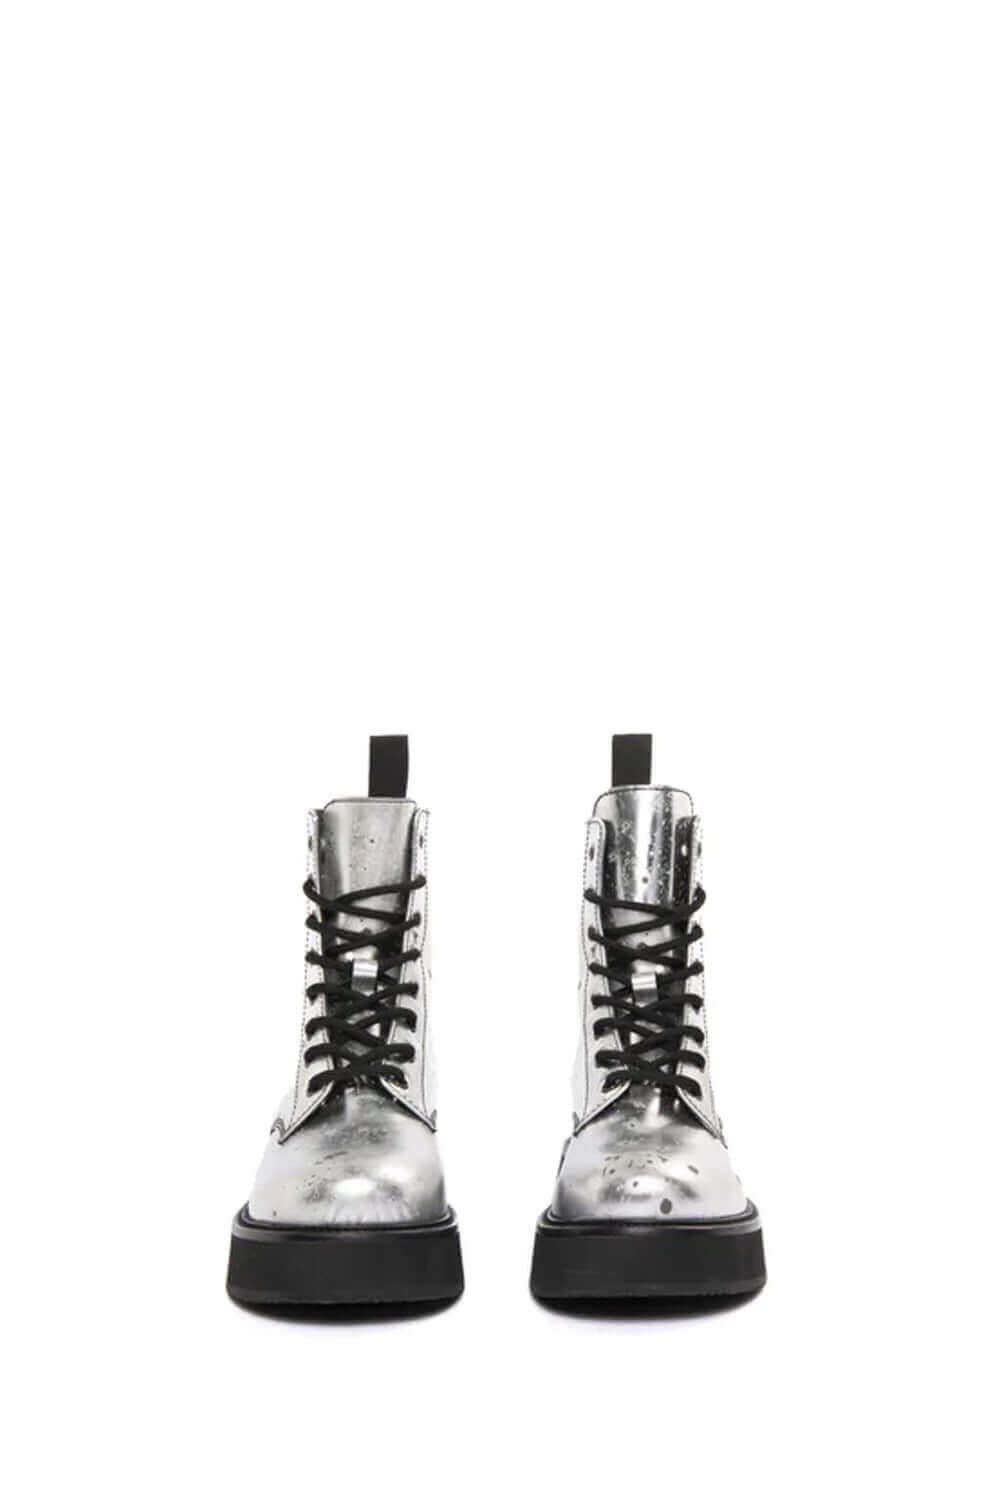 ARMY MOON BOOT Silver leather boots. Black laces. Sole height: 4 cm. Made in Italy. HTC LOS ANGELES